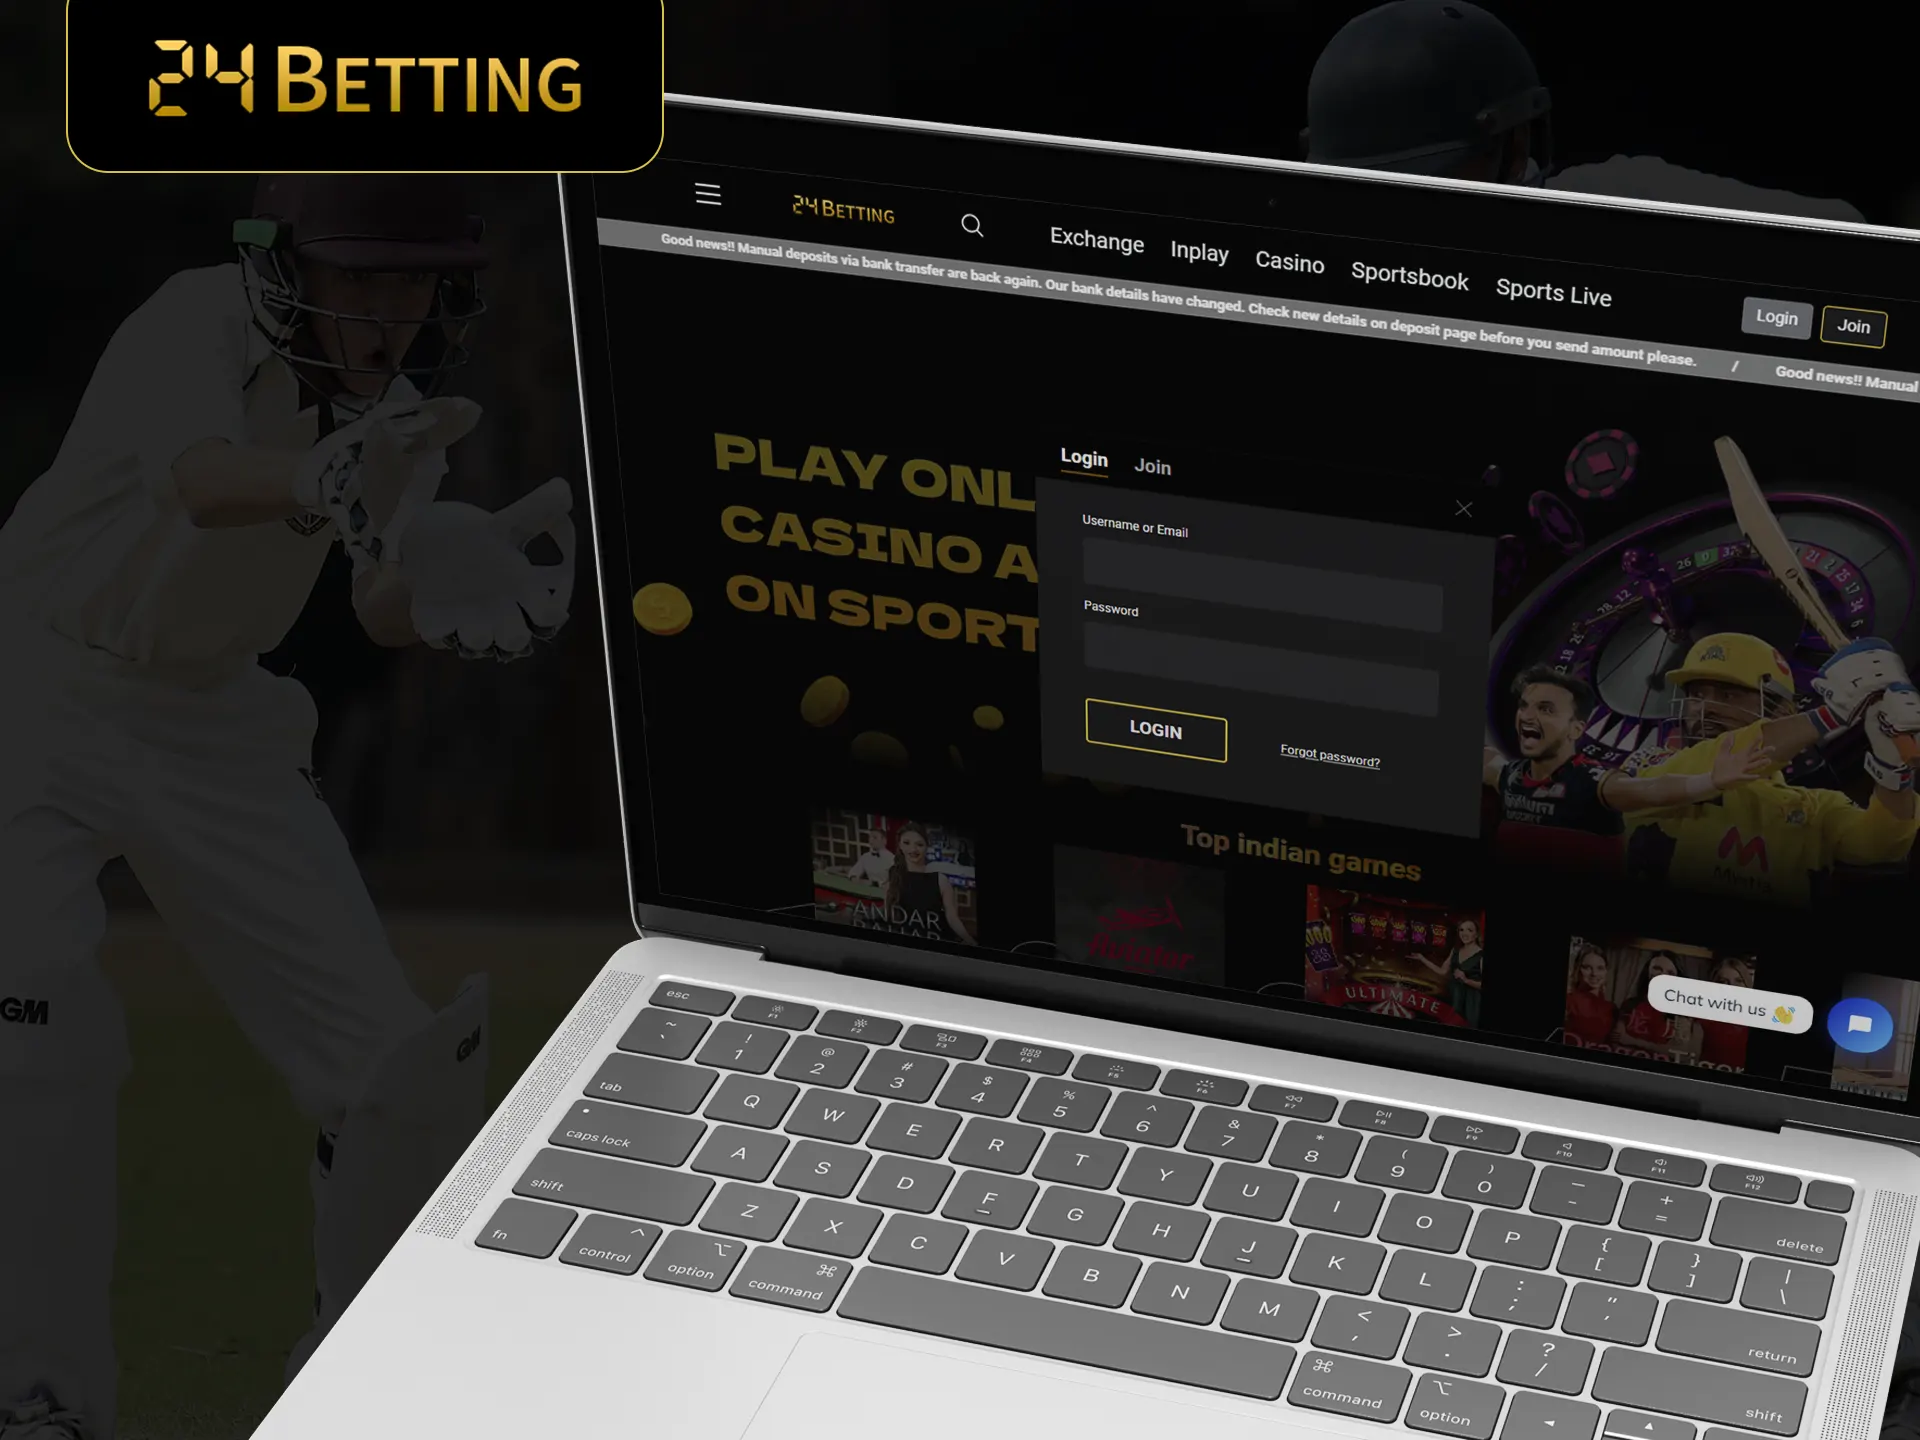 After registration, you can log into your 24betting account.